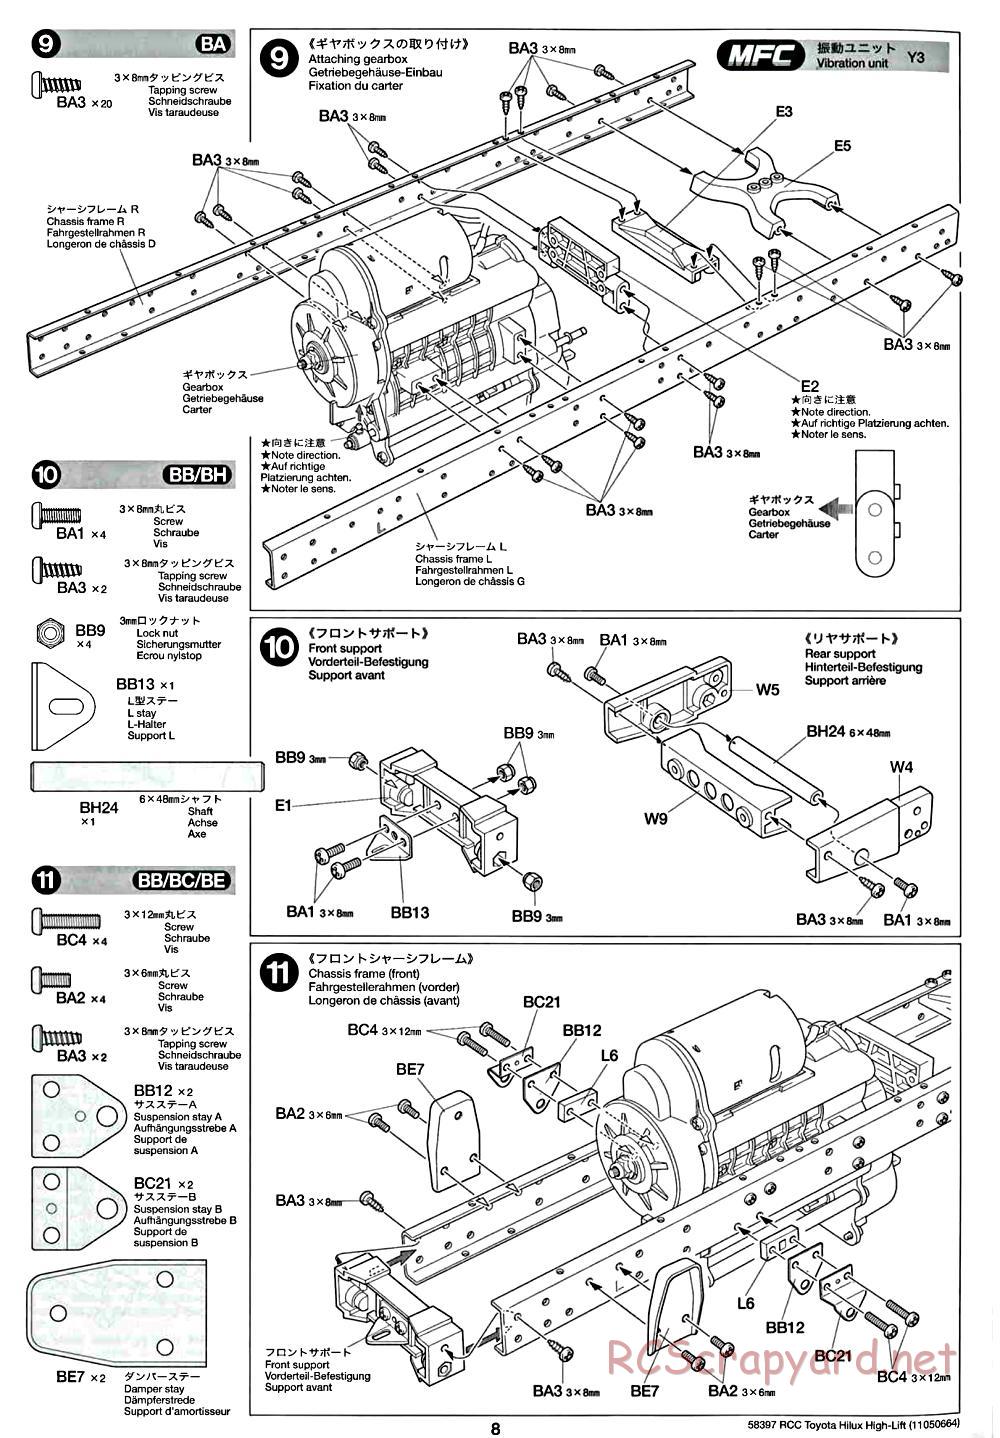 Tamiya - Toyota Hilux High-Lift Chassis - Manual - Page 8